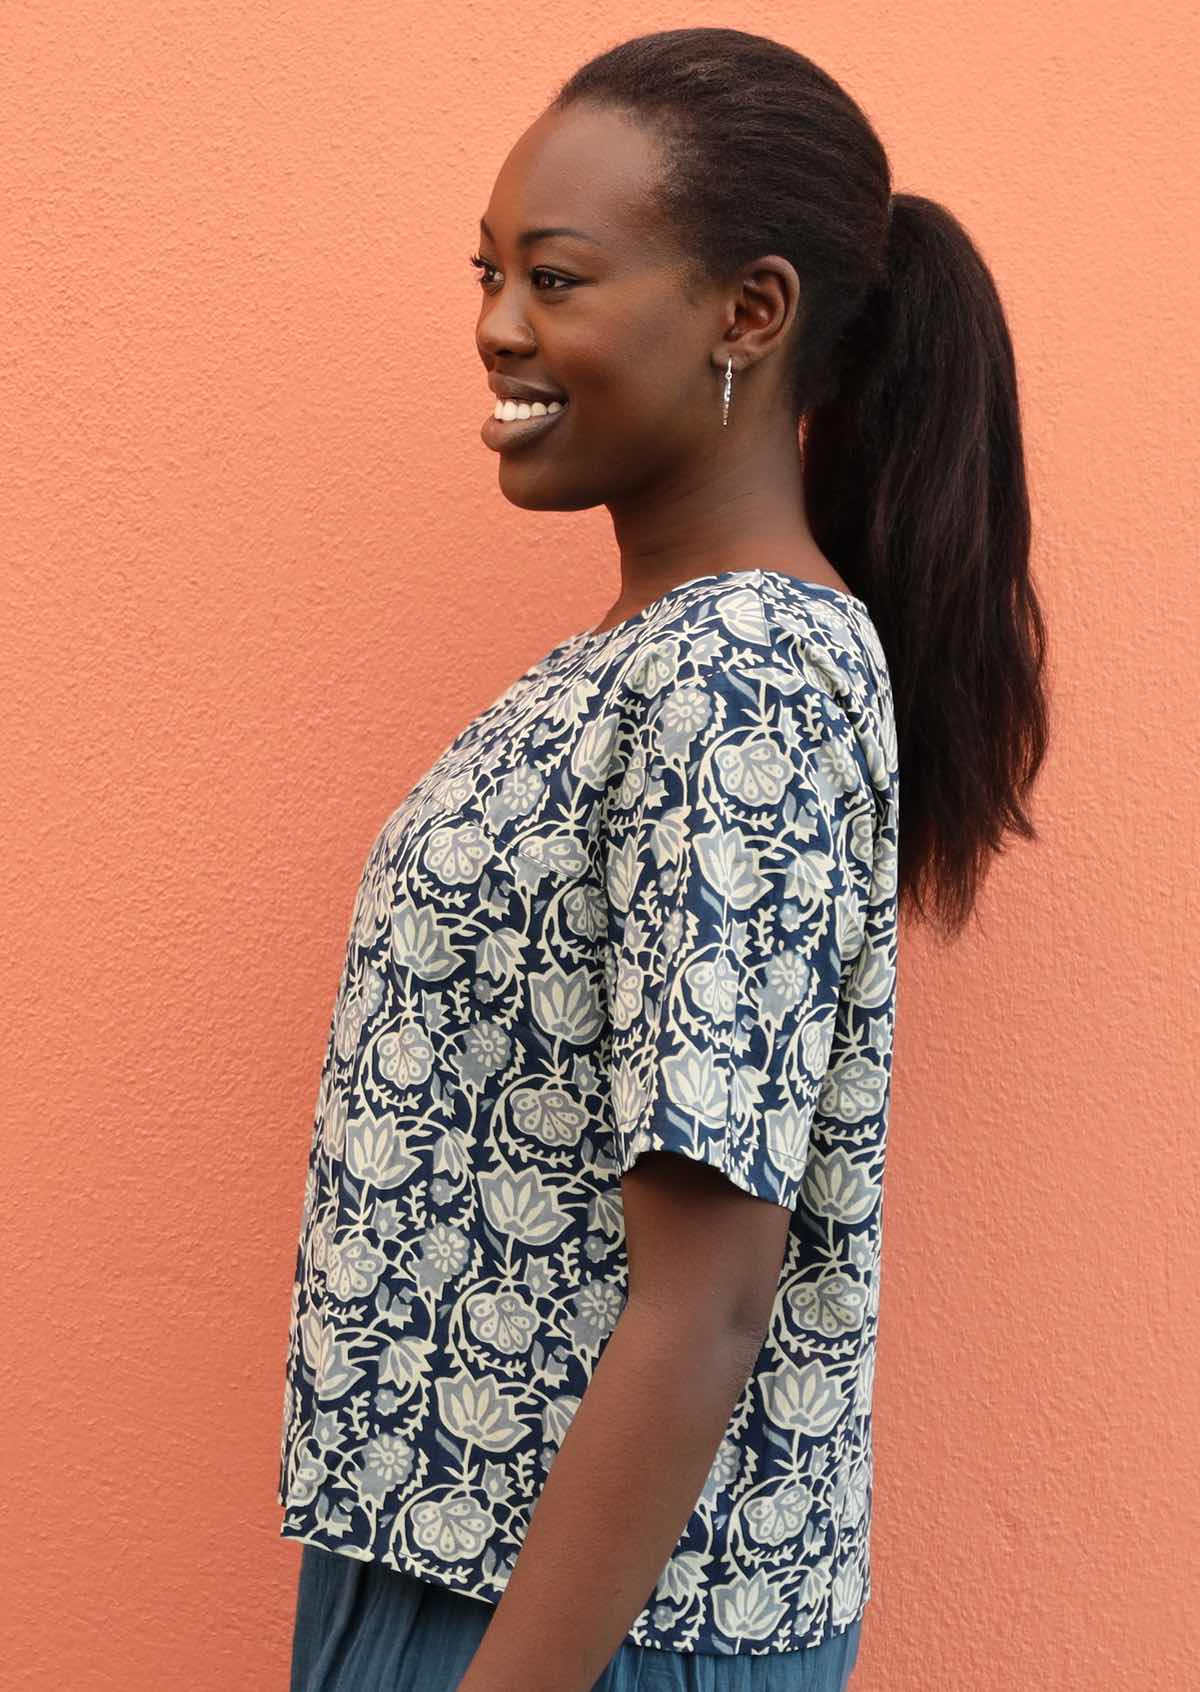 Model wears a short sleeve top with blue and white florals. 